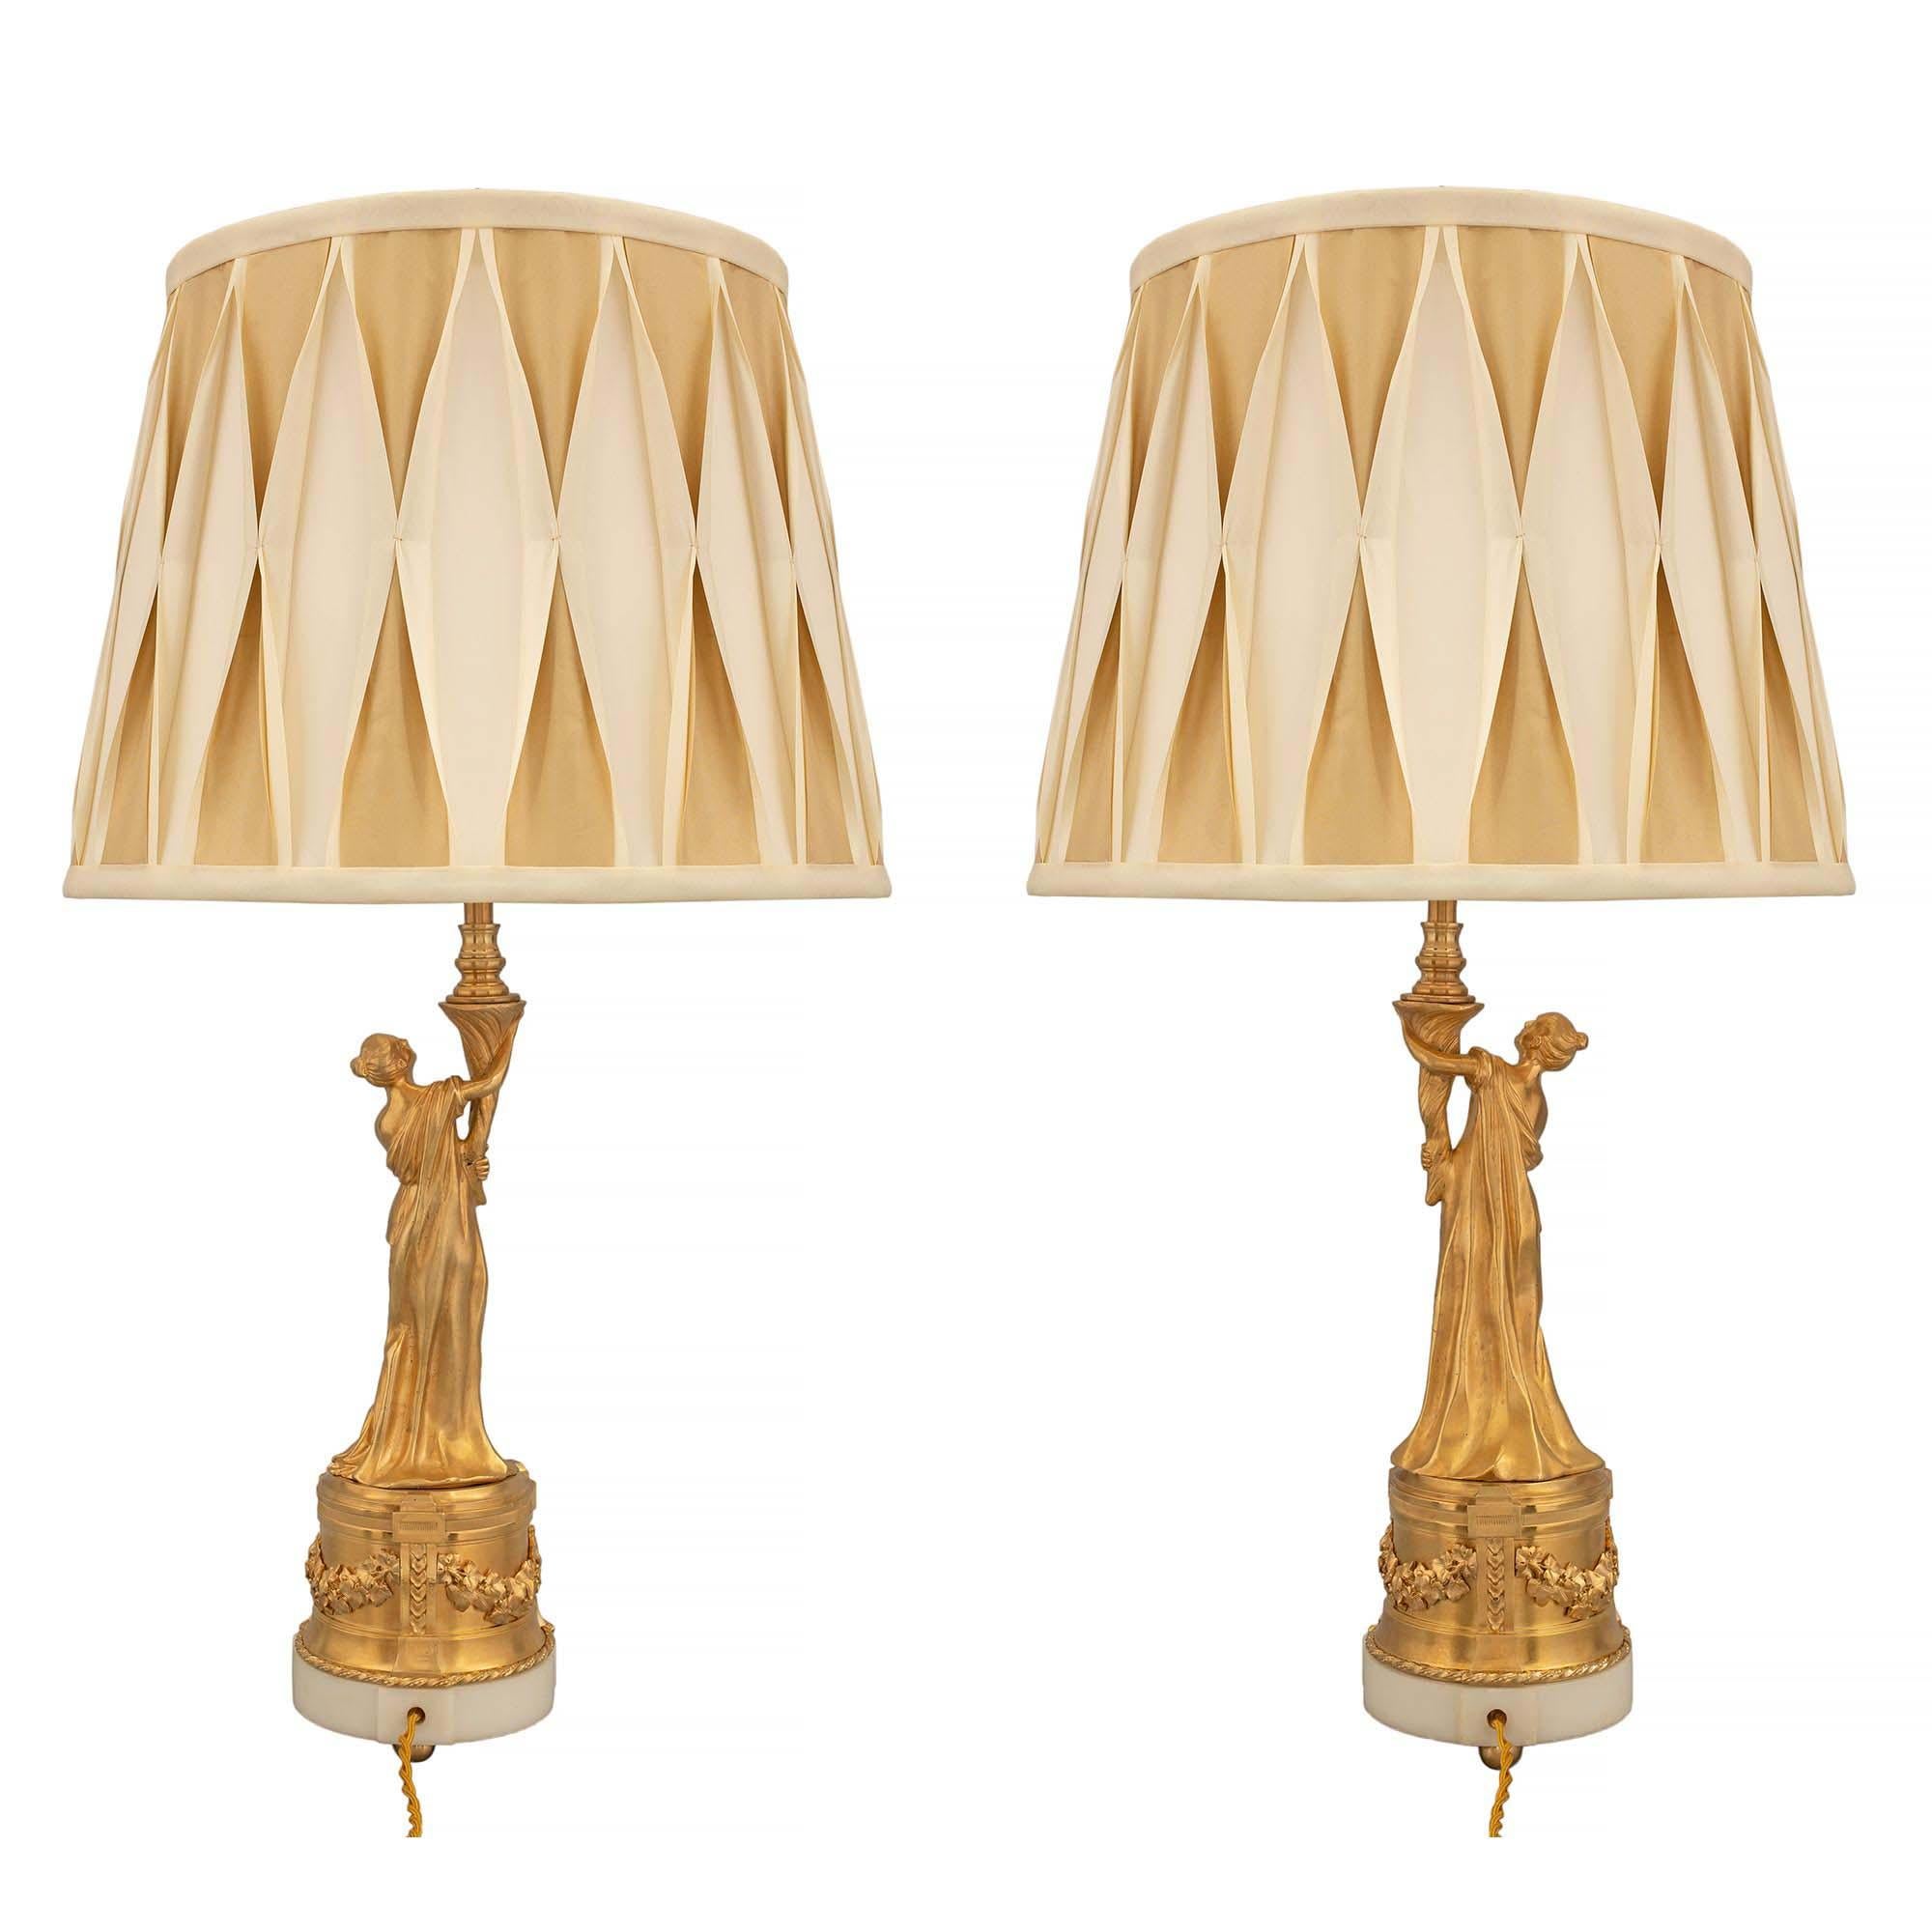 Pair of French 19th Century Louis XVI Style Ormolu and Carrara Marble Lamps In Good Condition For Sale In West Palm Beach, FL